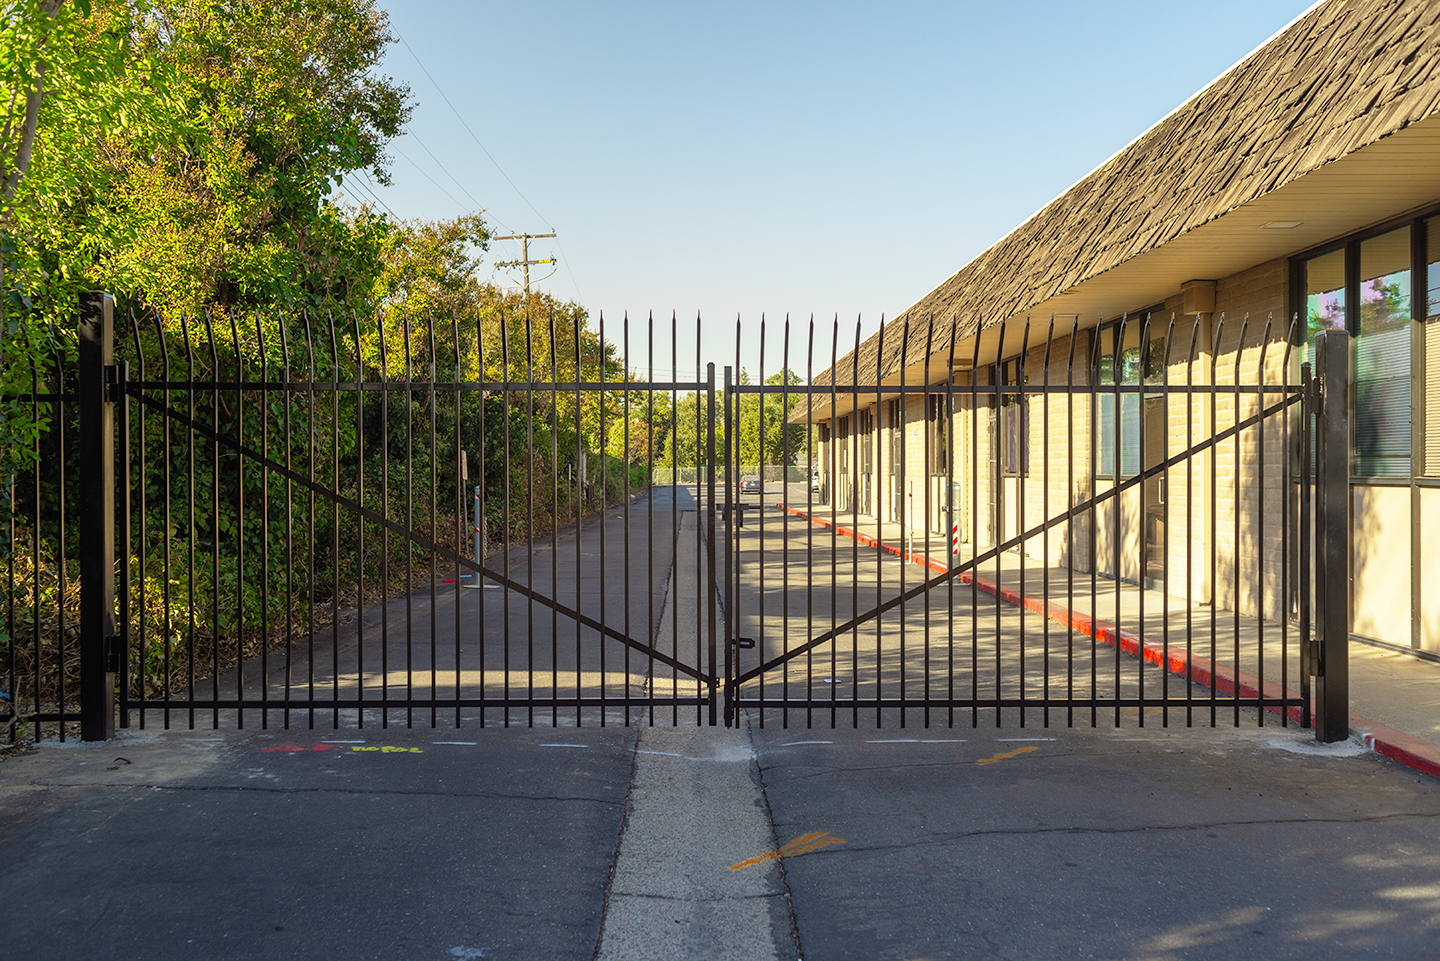 Ornamental and durable security fence protects businesses